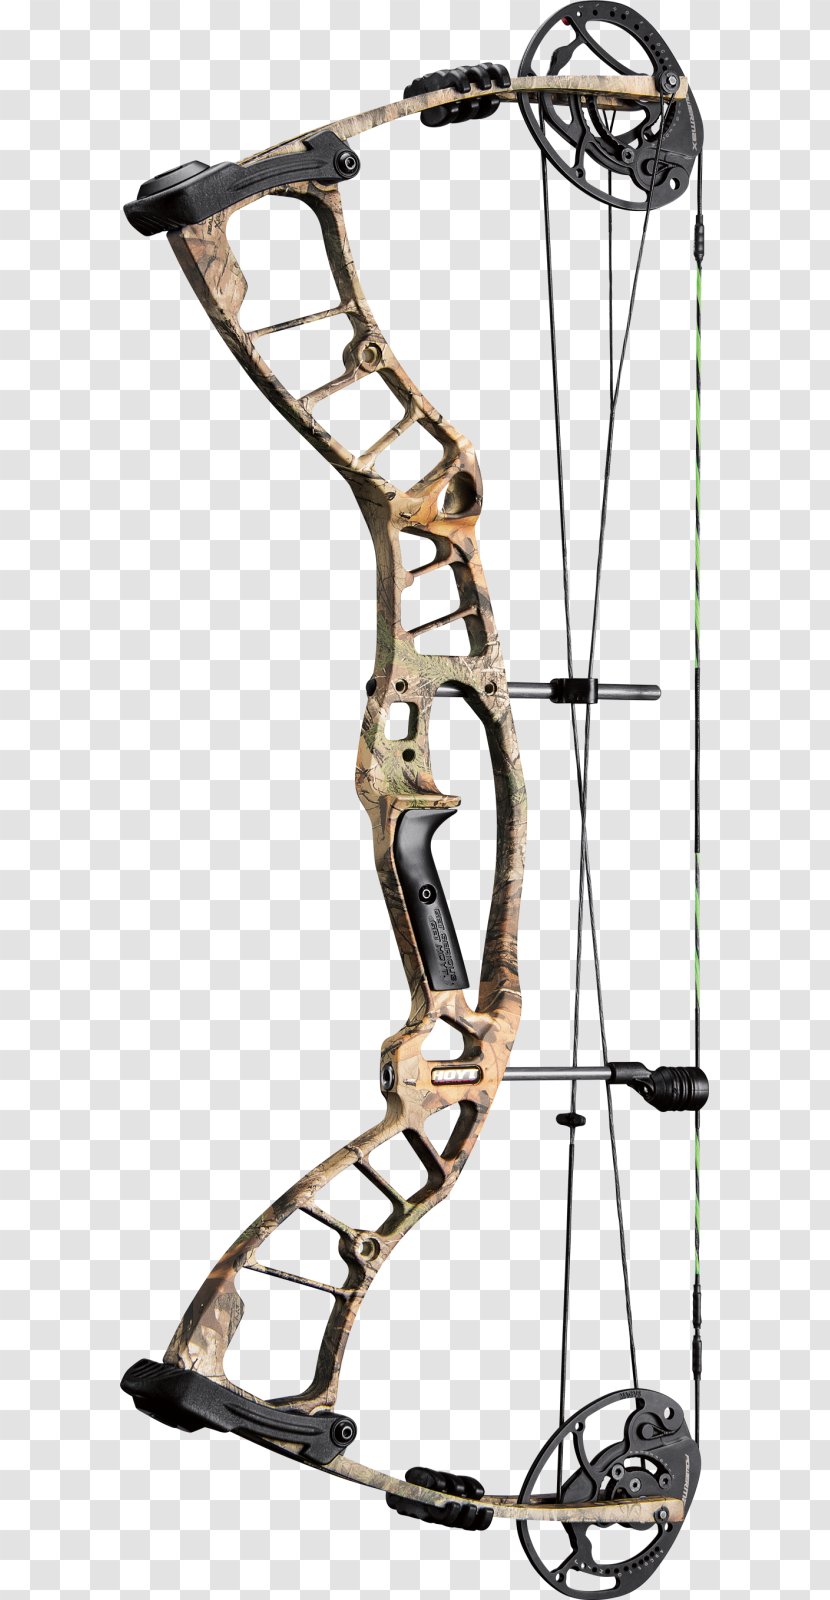 Compound Bows Bow And Arrow Hoyt Archery Hunting - Weapon - Cover Transparent PNG